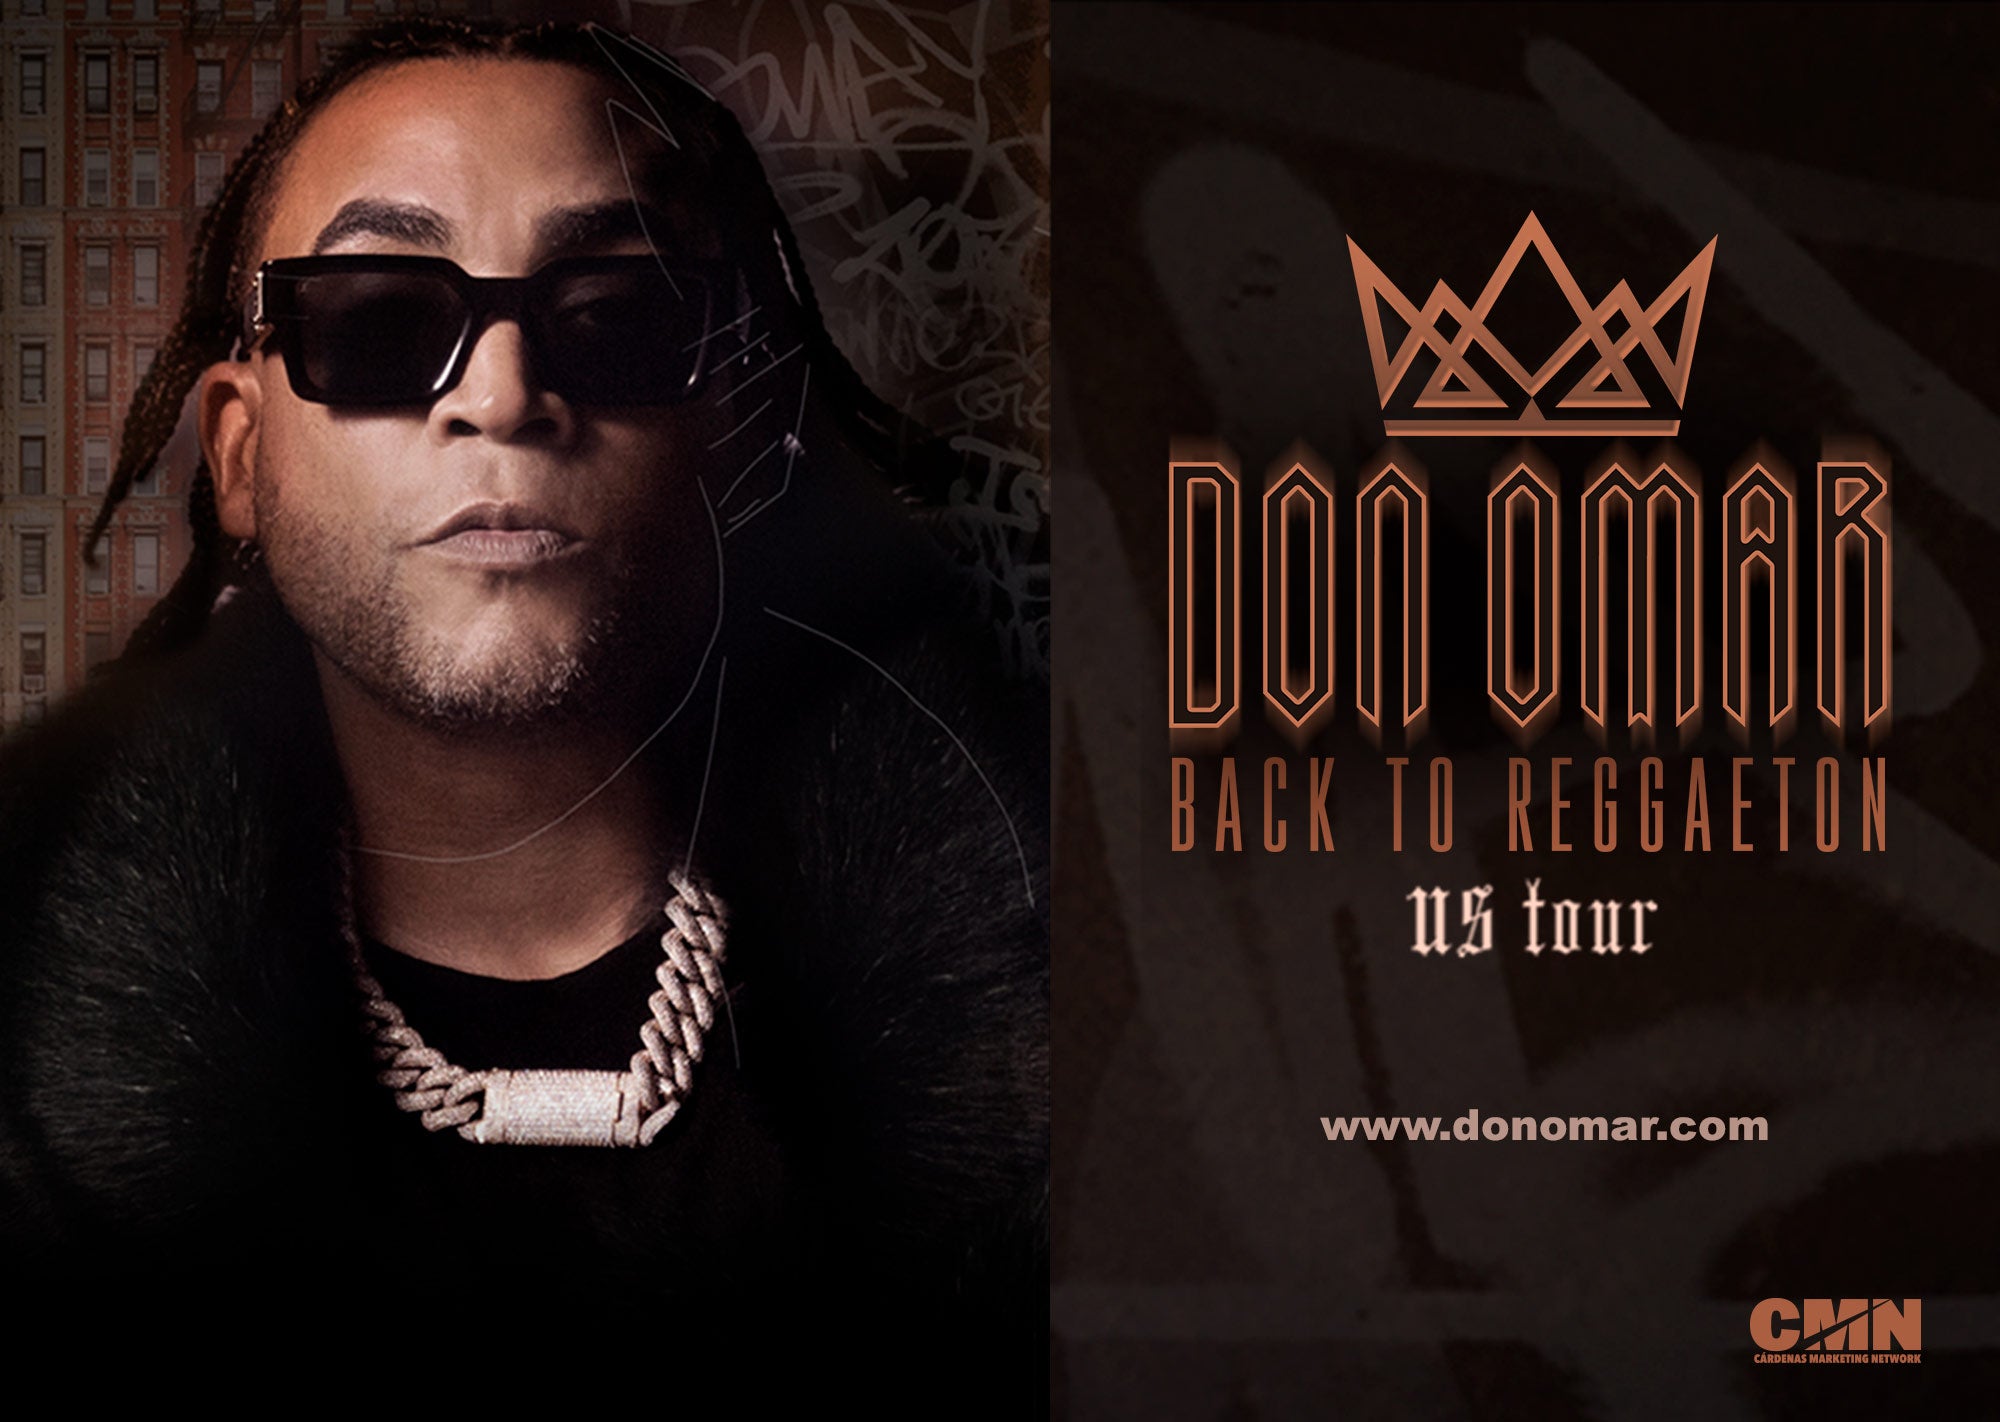  Don Omar Brings Second Leg of Tour to Austin Area August 16